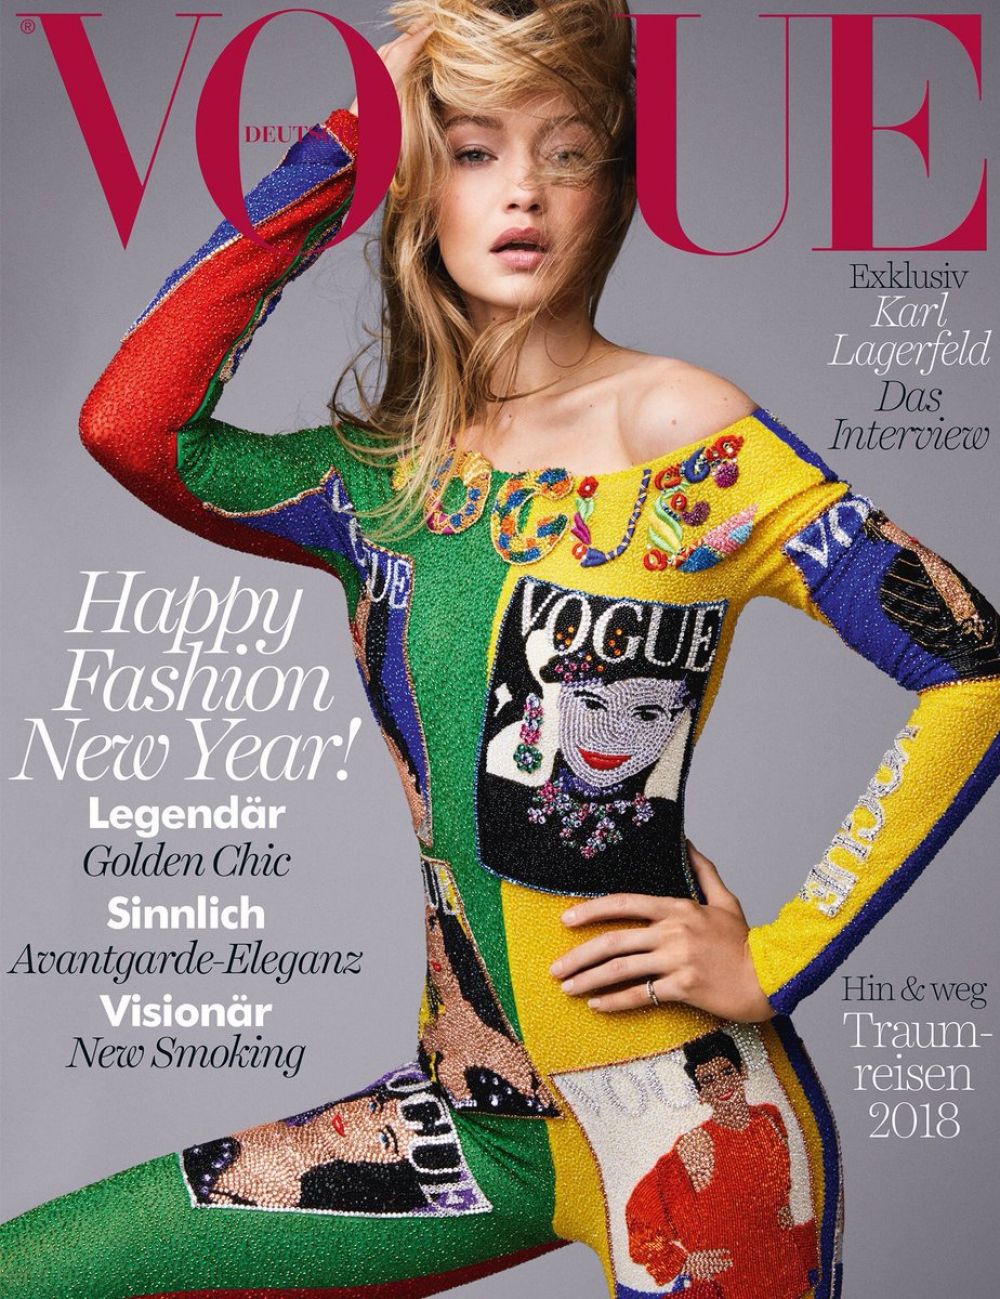 GIGI HADID on the Cover of Vogue Magazine, Germany January 2018 Issue